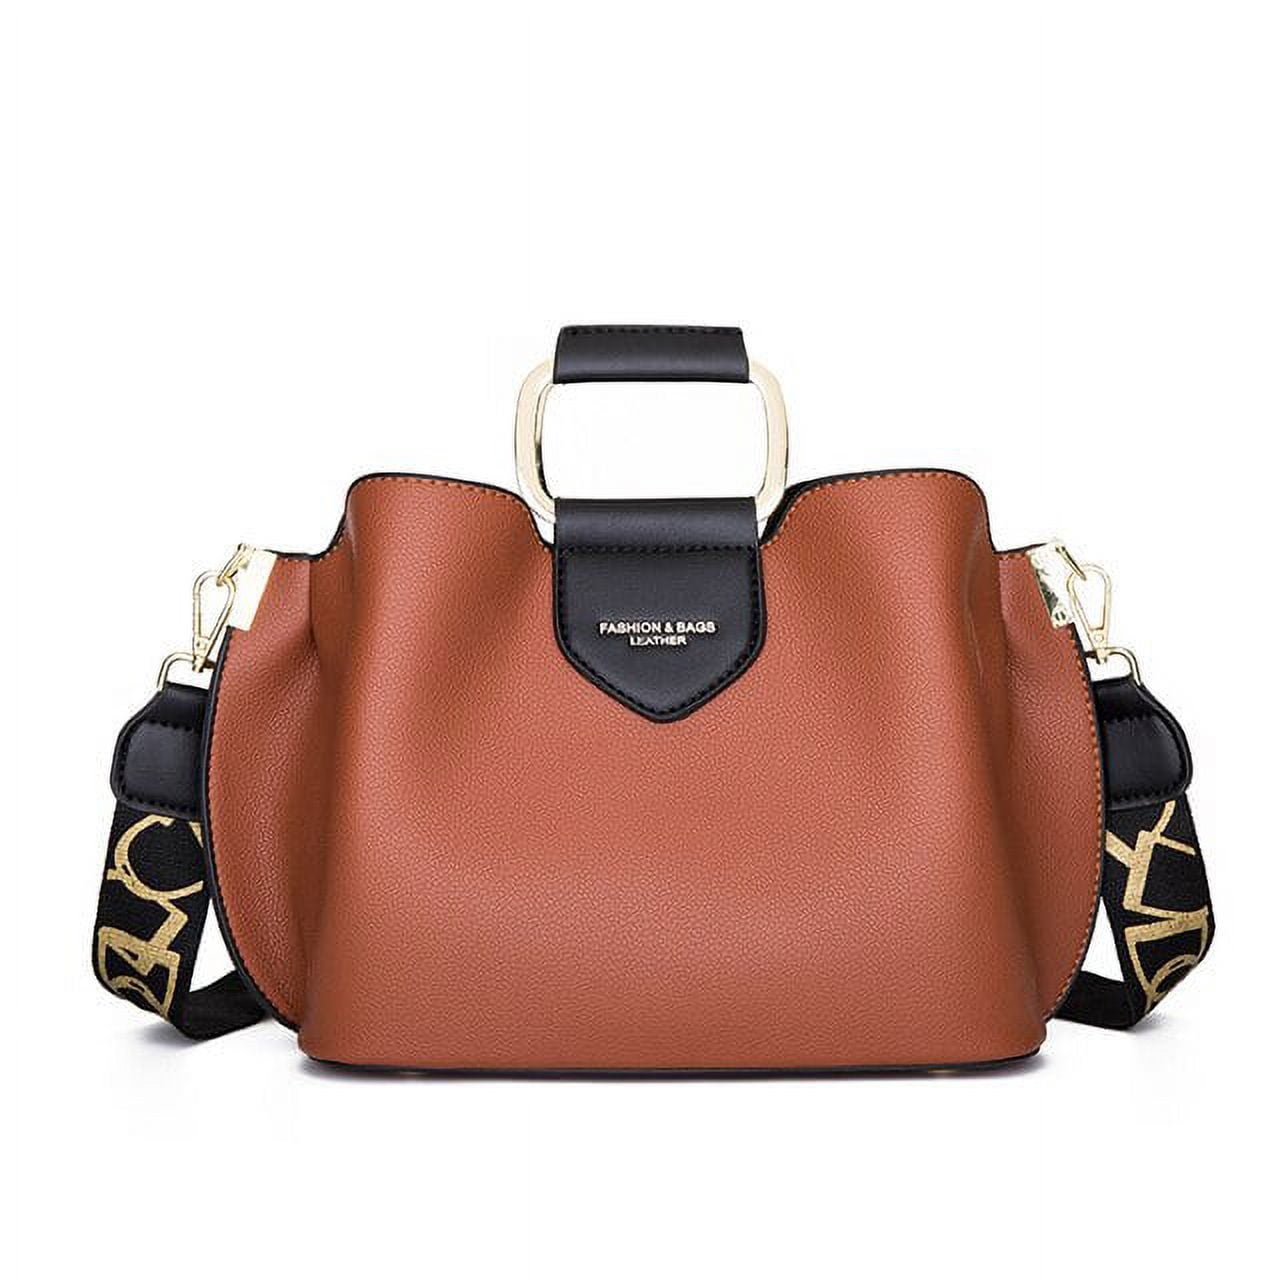 ELLE TOP: 10 Hot Handbags That Are Winning This Spring | Elle Canada